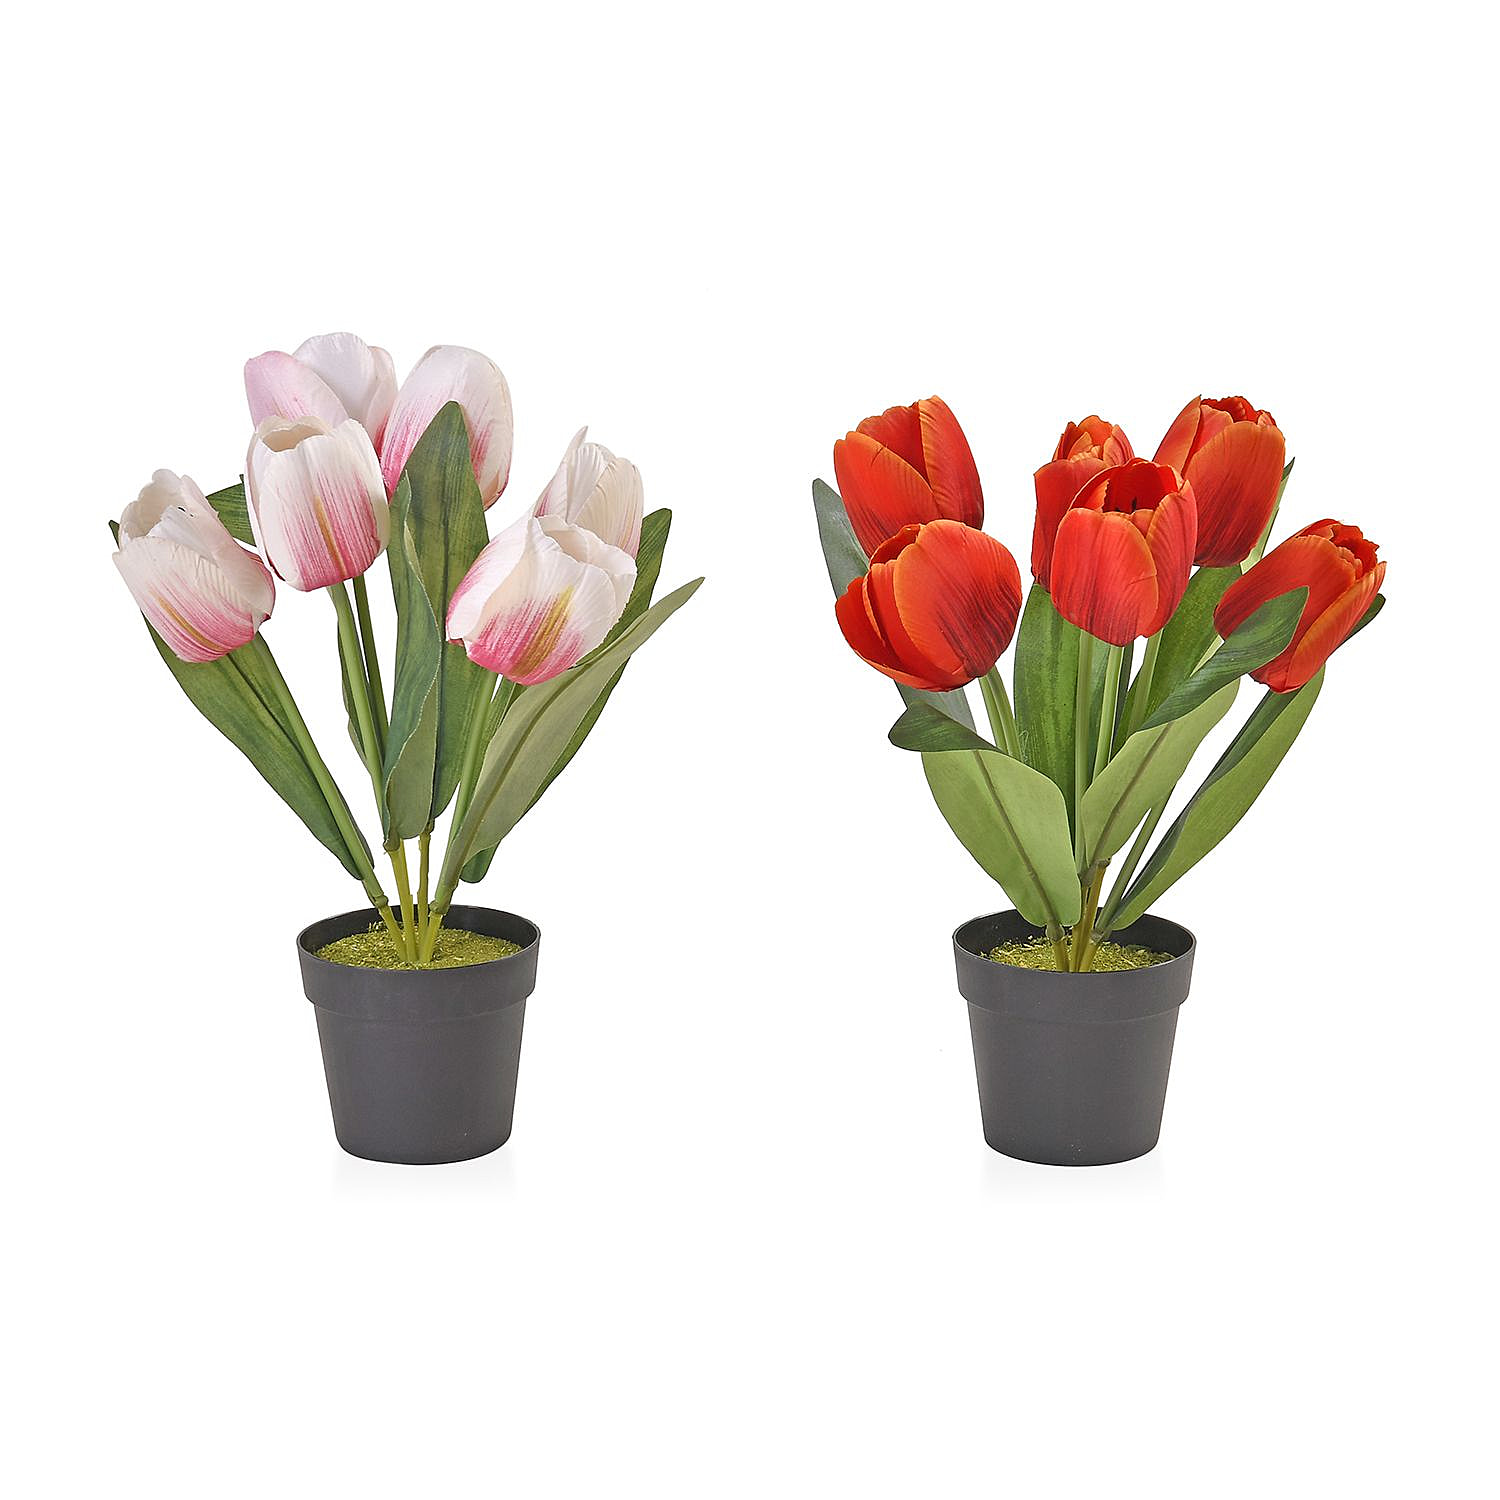 Set of 2 Artifical 6 Heads Tulip Flower Pot With Green Leaves - Pink & Red